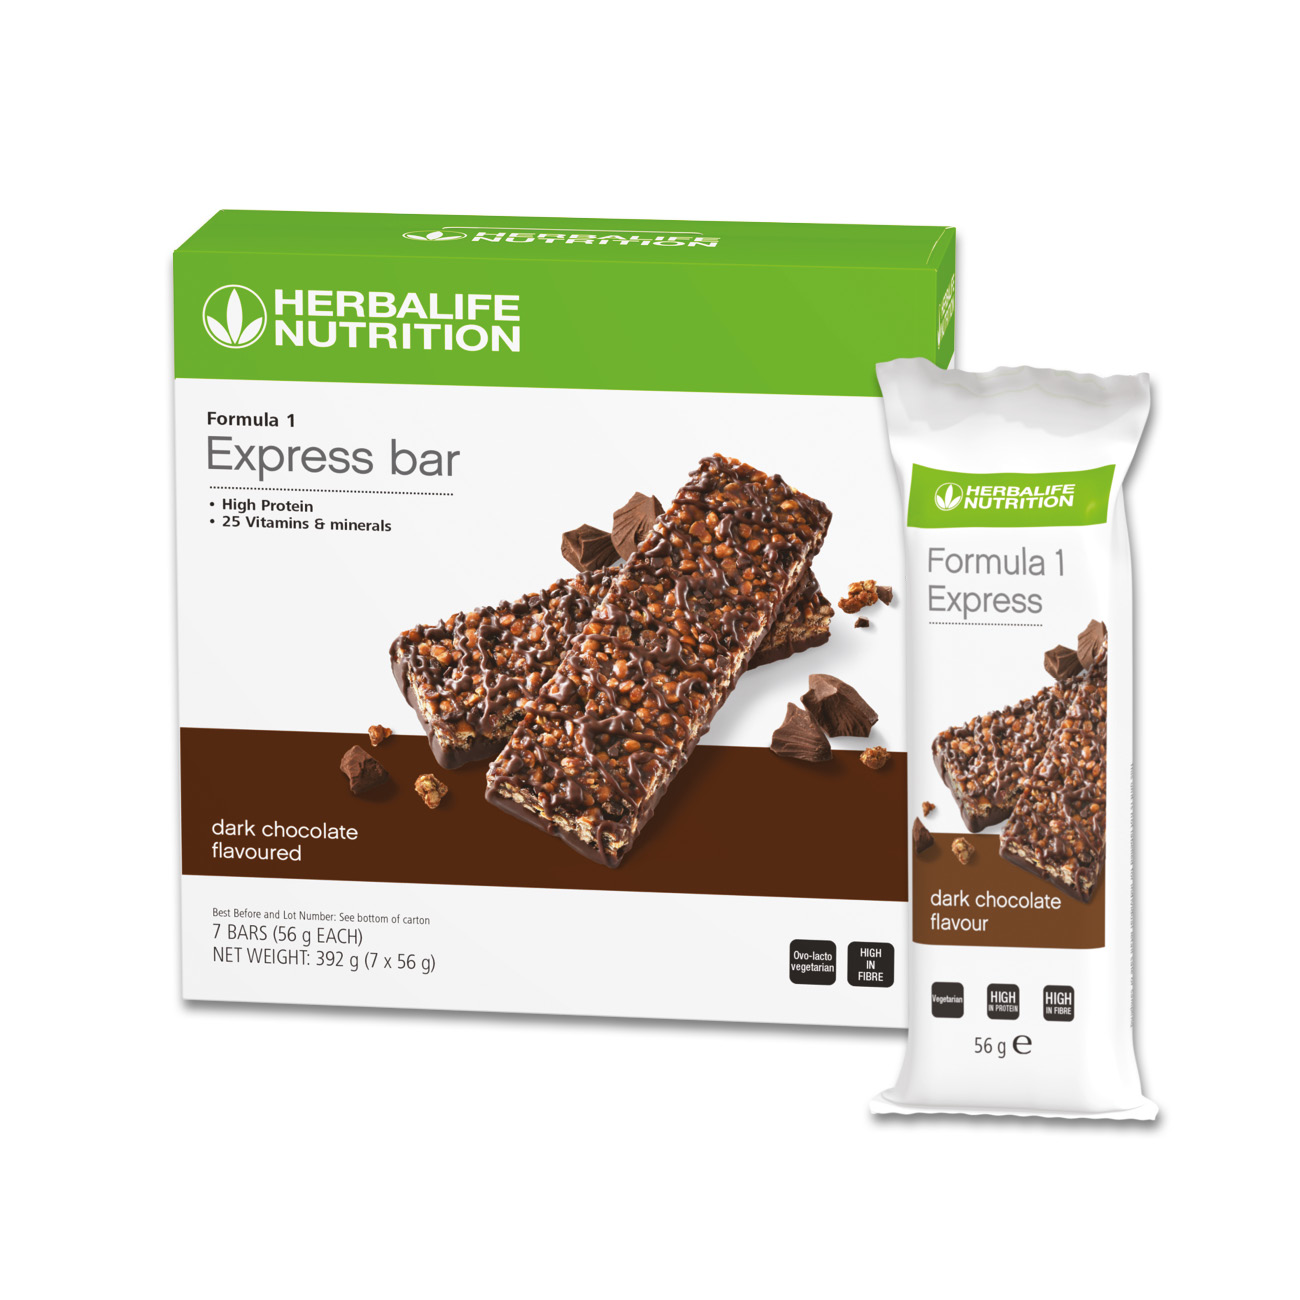 Never miss a meal again with Formula 1 Express Healthy Meal Bars, your ideal healthy meal on-the-go. Offering both great nutrition and convenience in one delicious bar, it contains the perfect blend of high quality protein, fibre, vitamins and minerals.